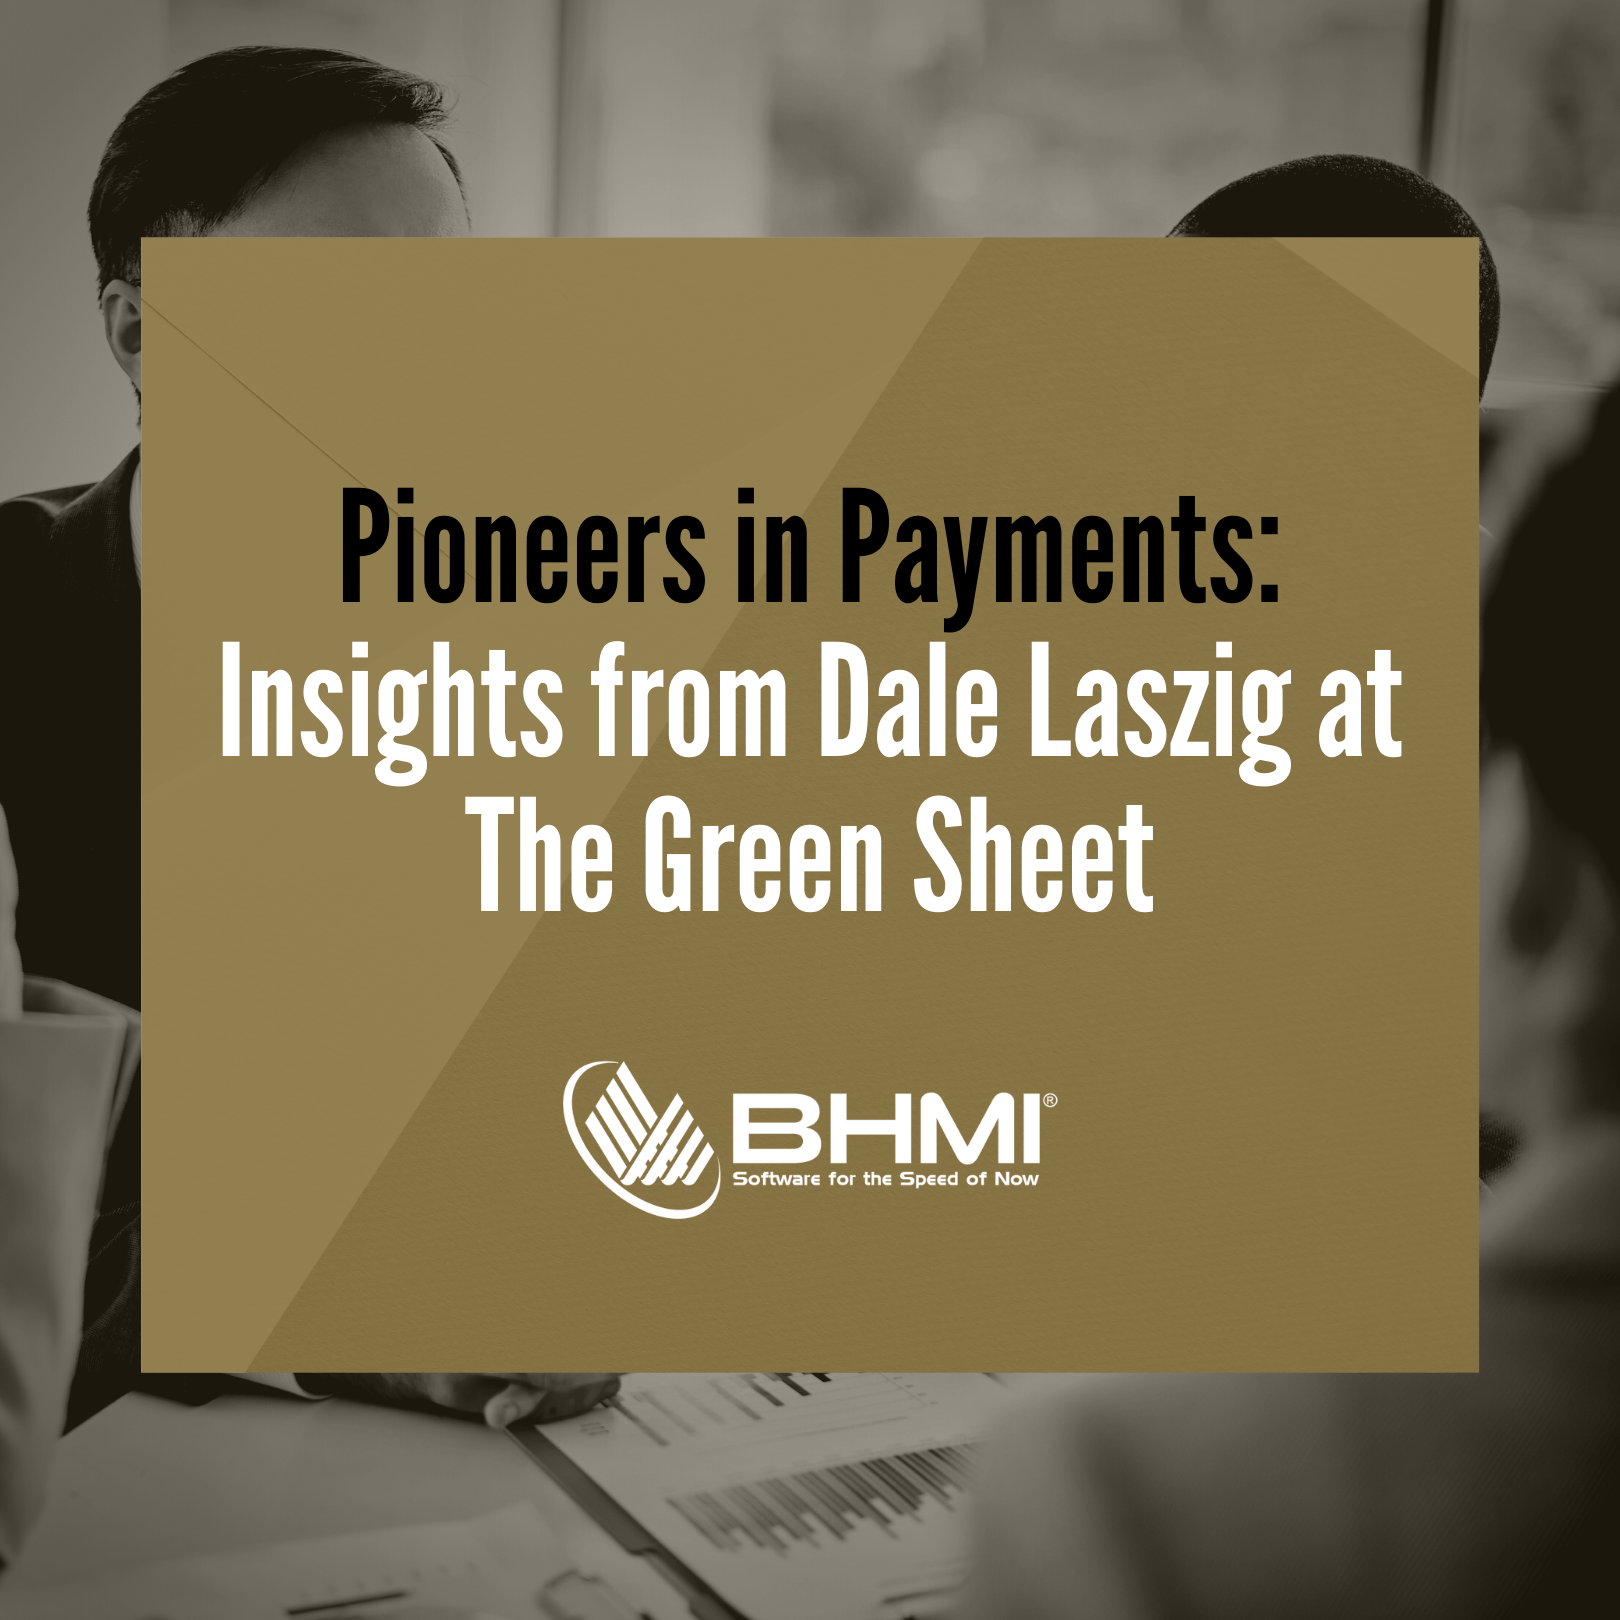 Pioneers in Payments: Insights from Dale Laszig at The Green Sheet